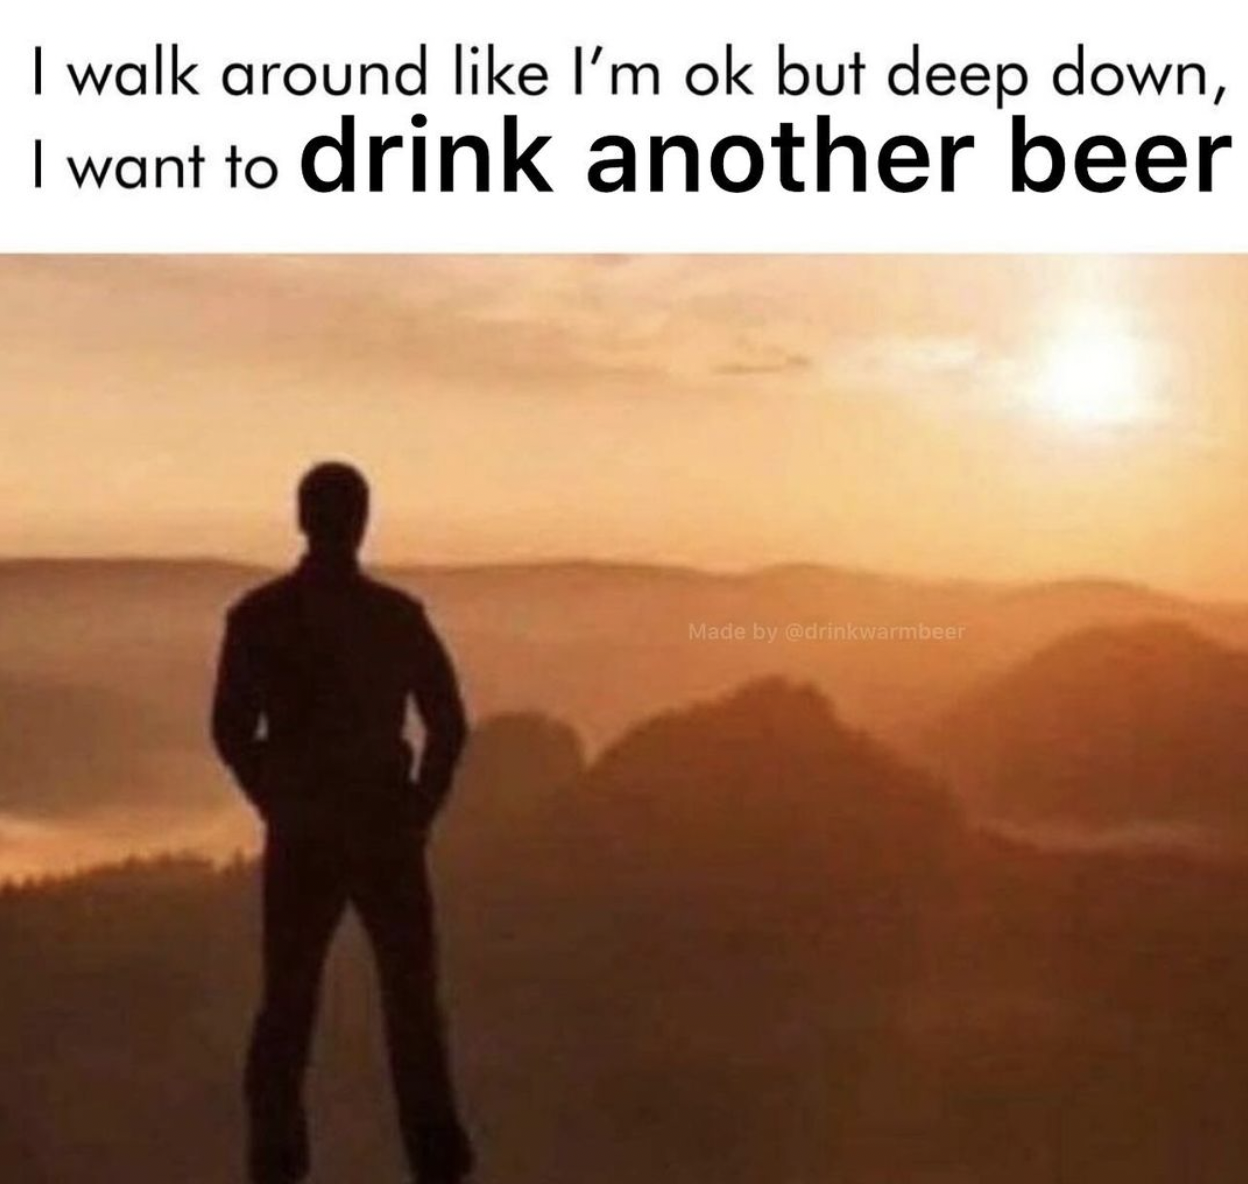 photo caption - I walk around I'm ok but deep down, I want to drink another beer Made by